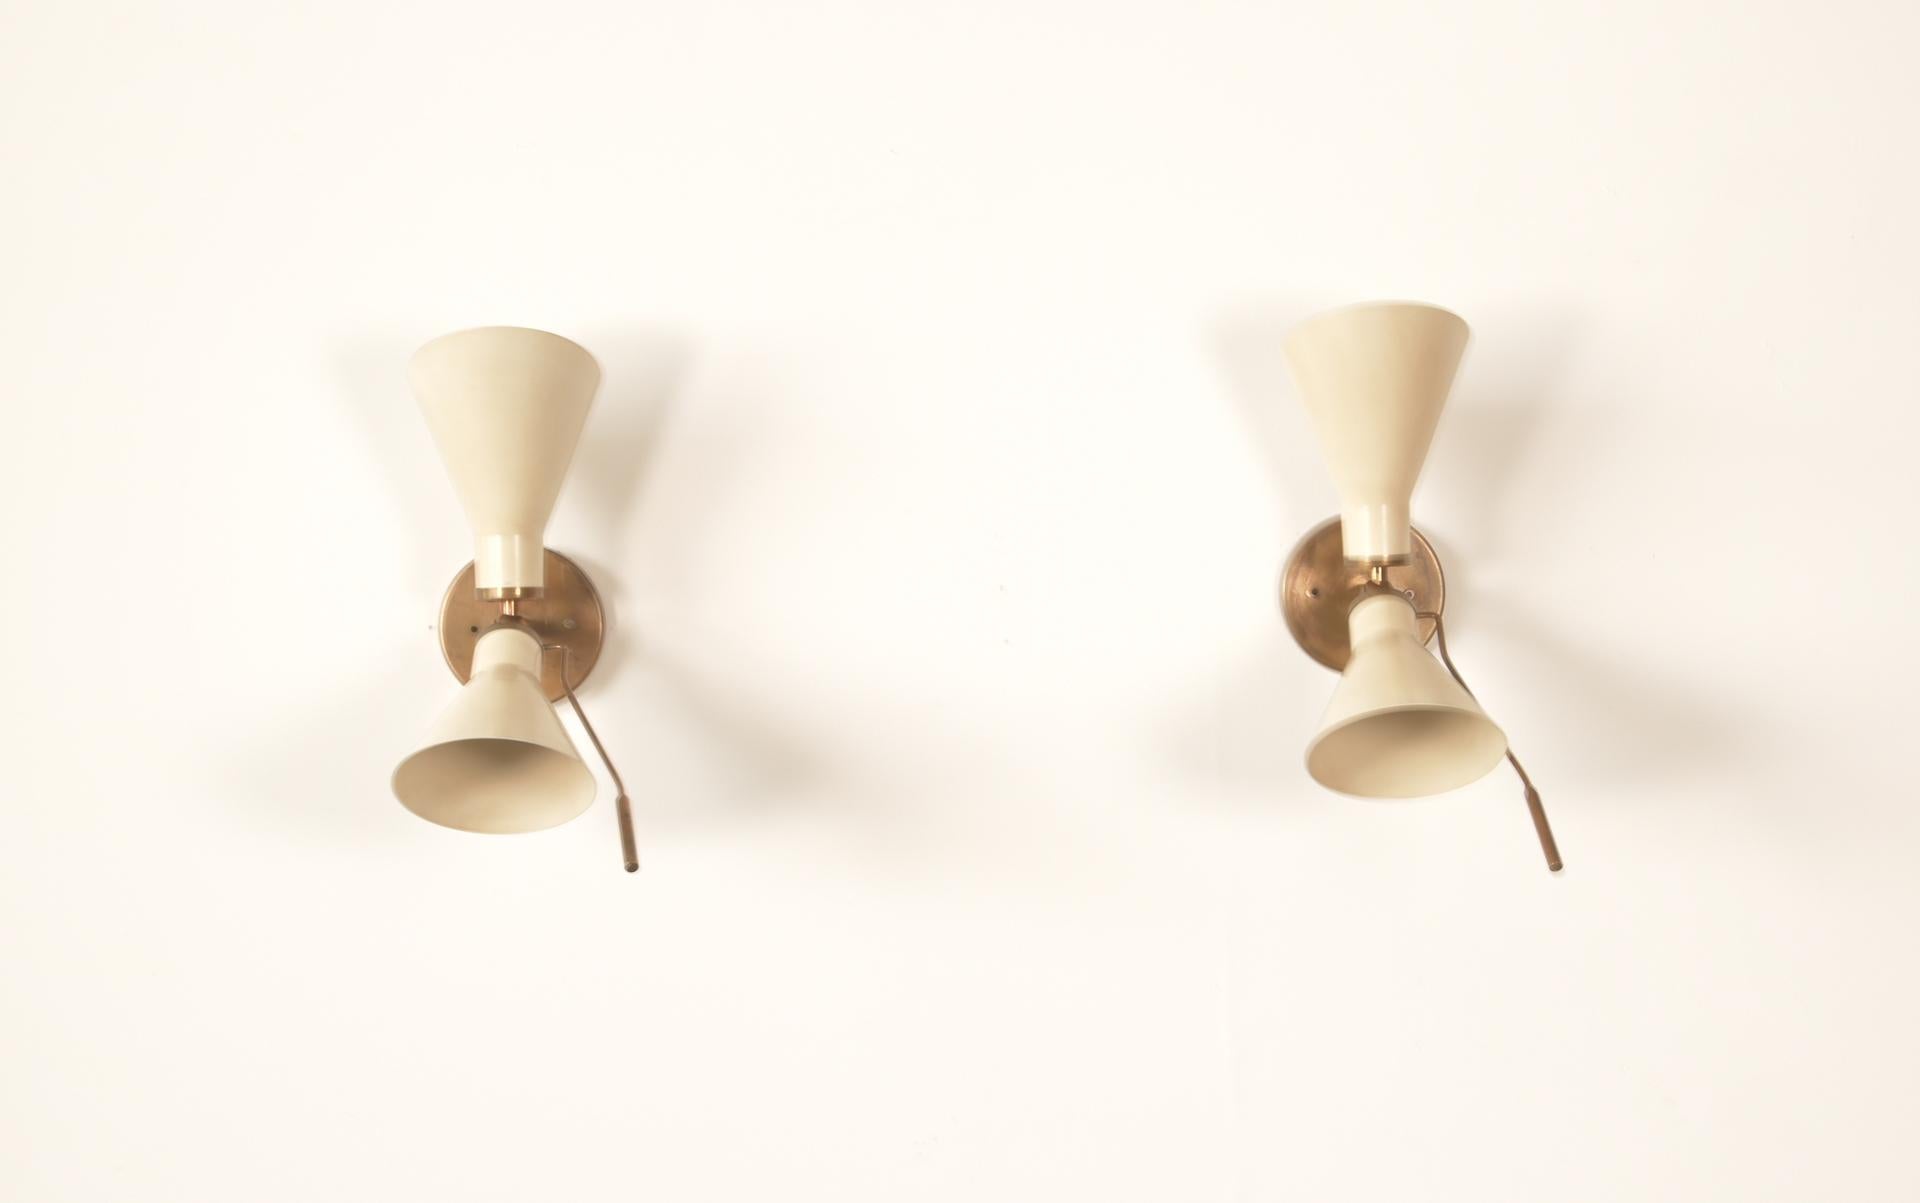 Pair of Model 131 articulating sconces by Gino Sarfatti designed in Italy, circa 1950s. Original backplates.